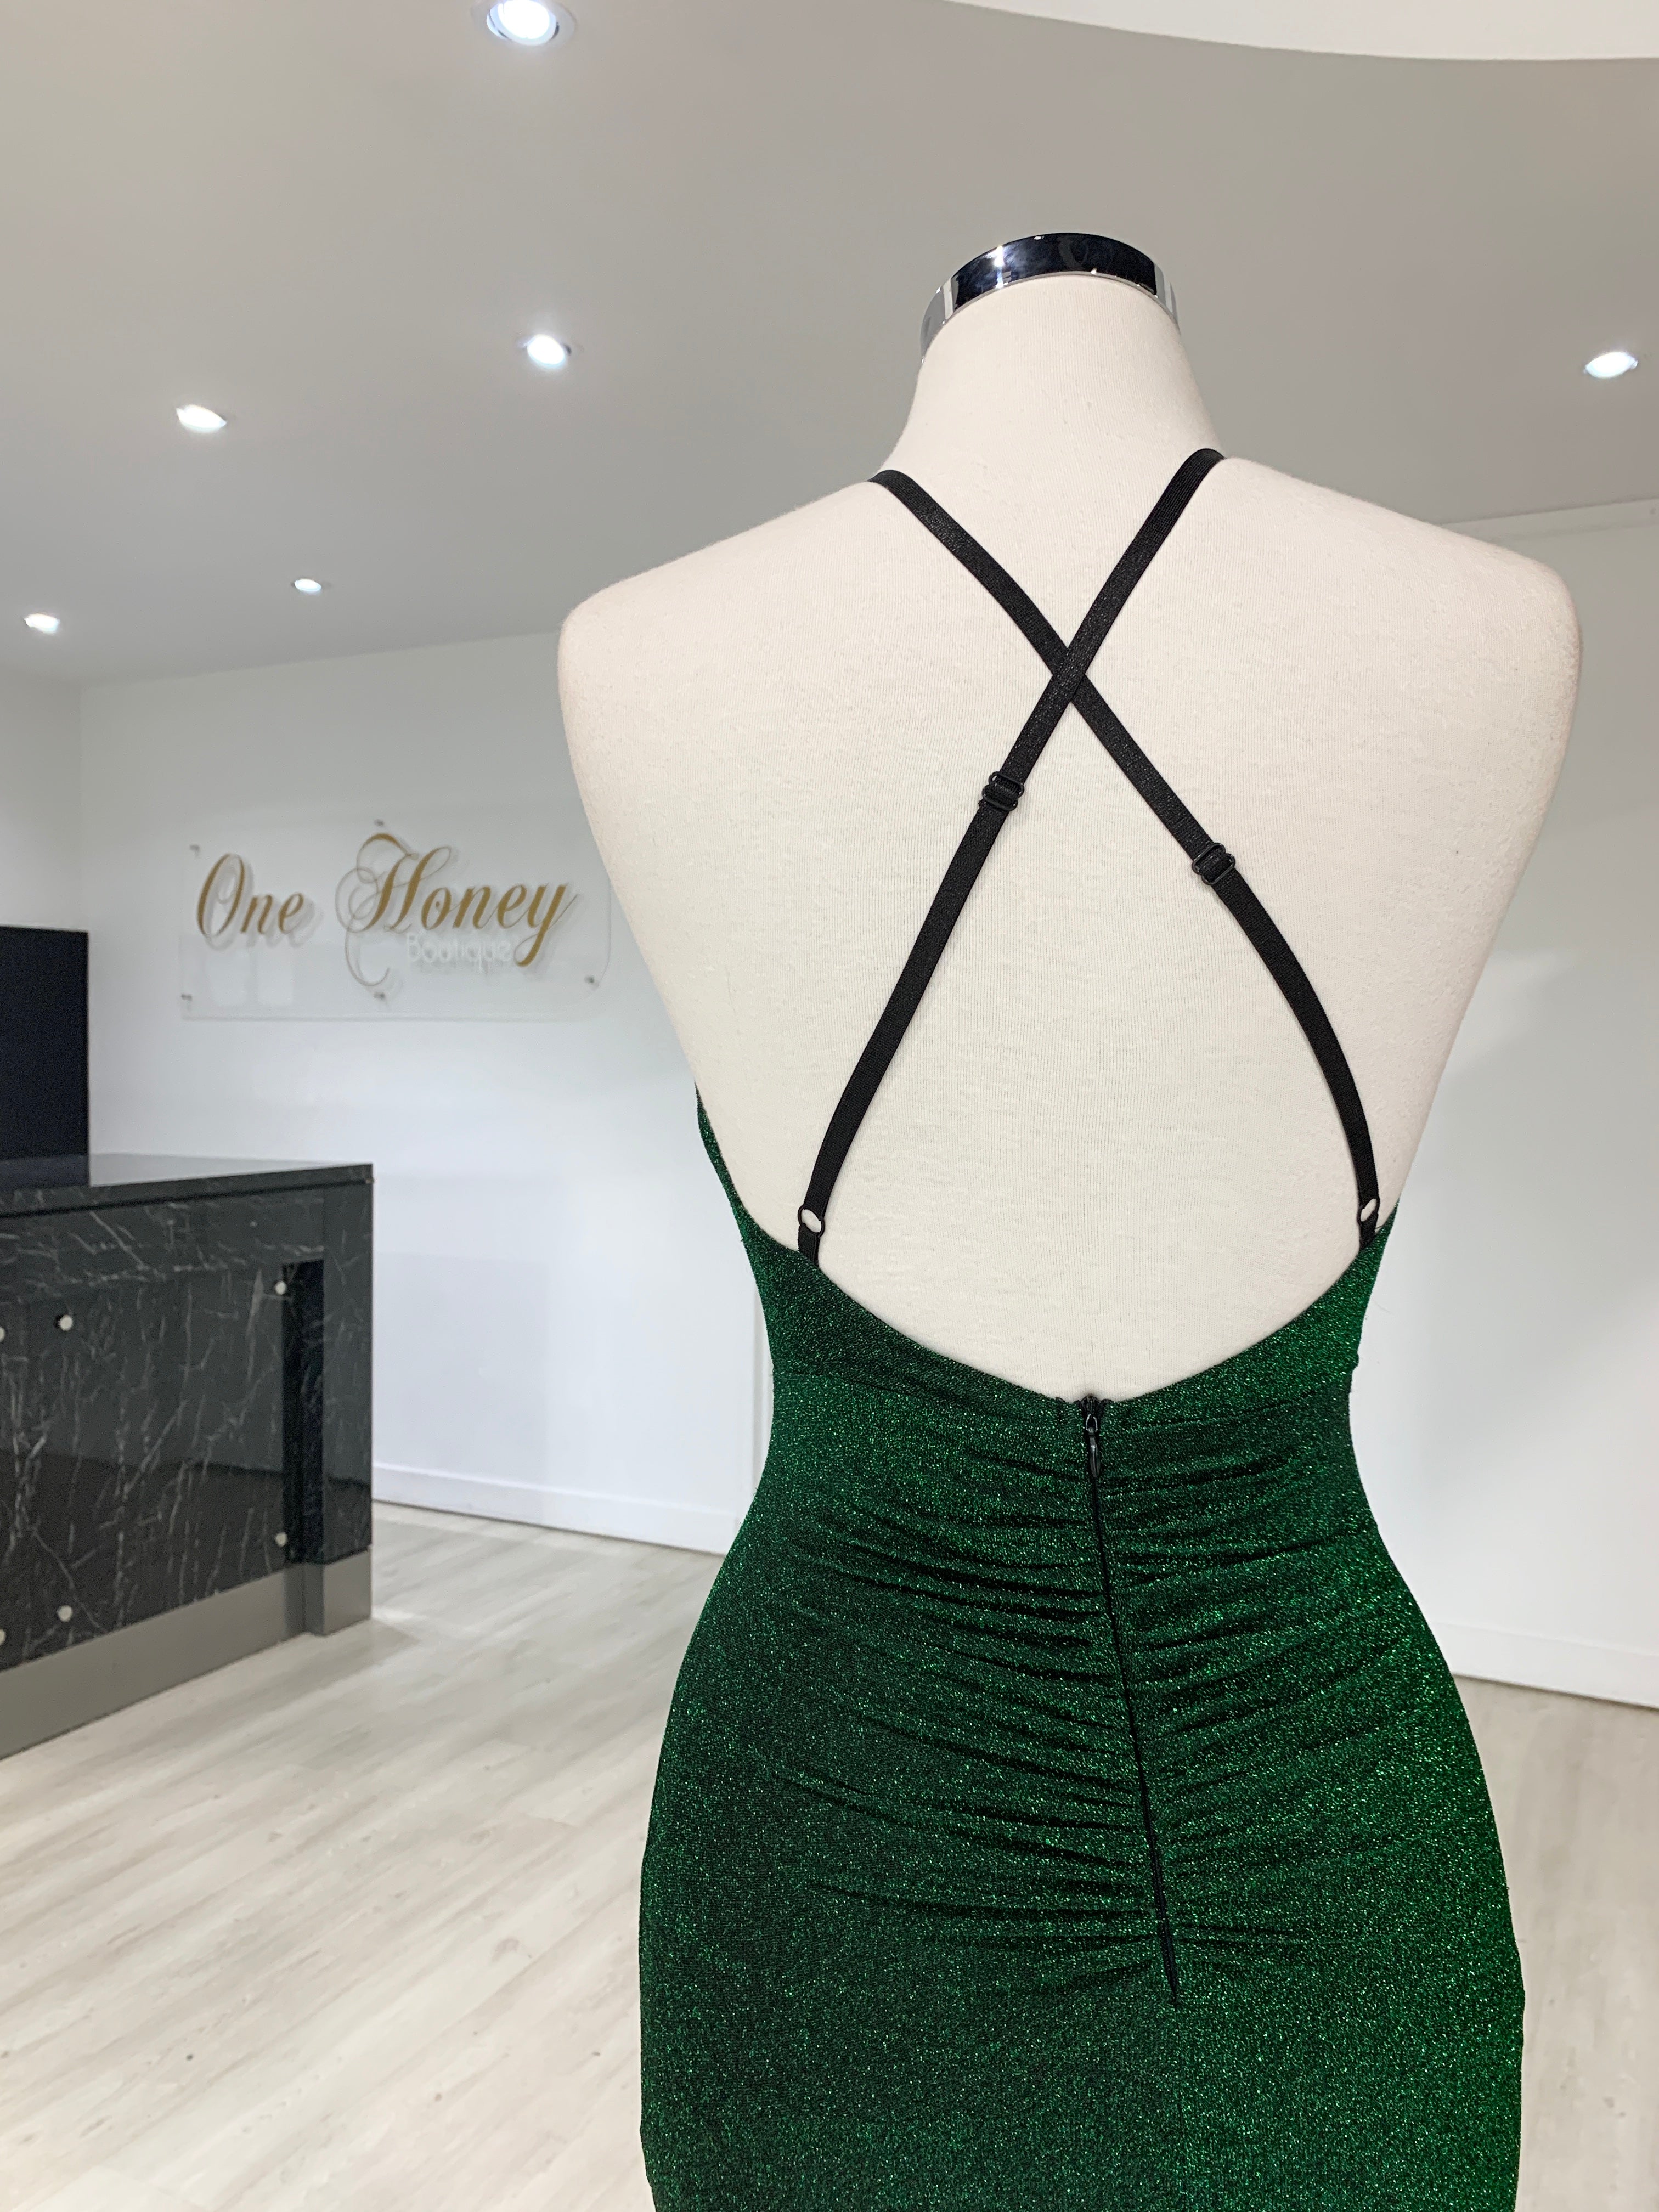 Honey Couture LUREX Emerald Green Sparkle Mermaid Evening Gown Dress {vendor} AfterPay Humm ZipPay LayBuy Sezzle